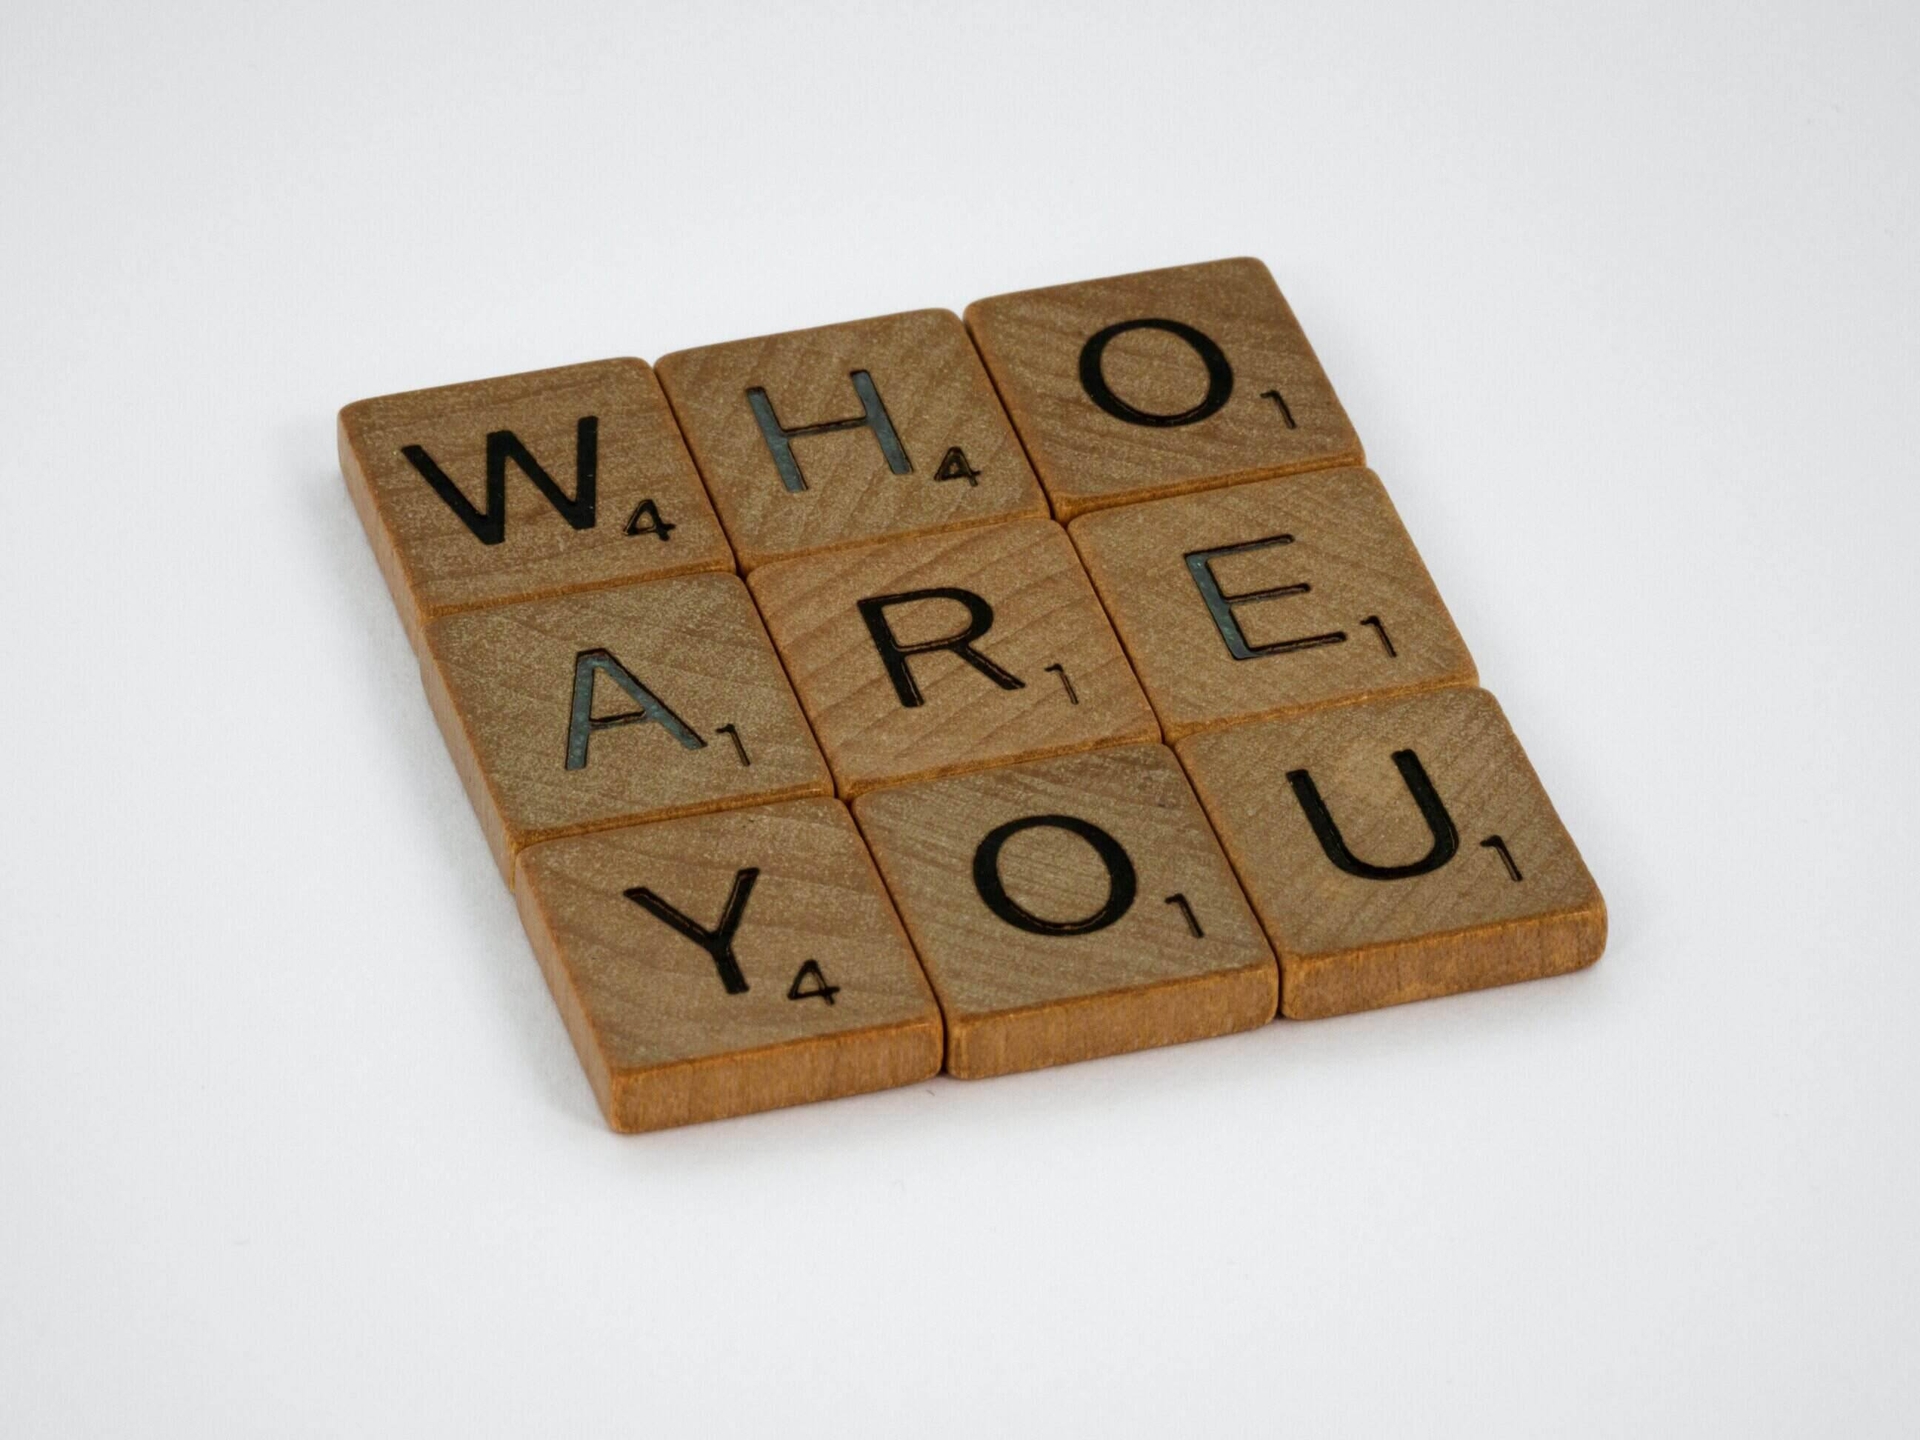 Scrabble tiles "Who Are You"